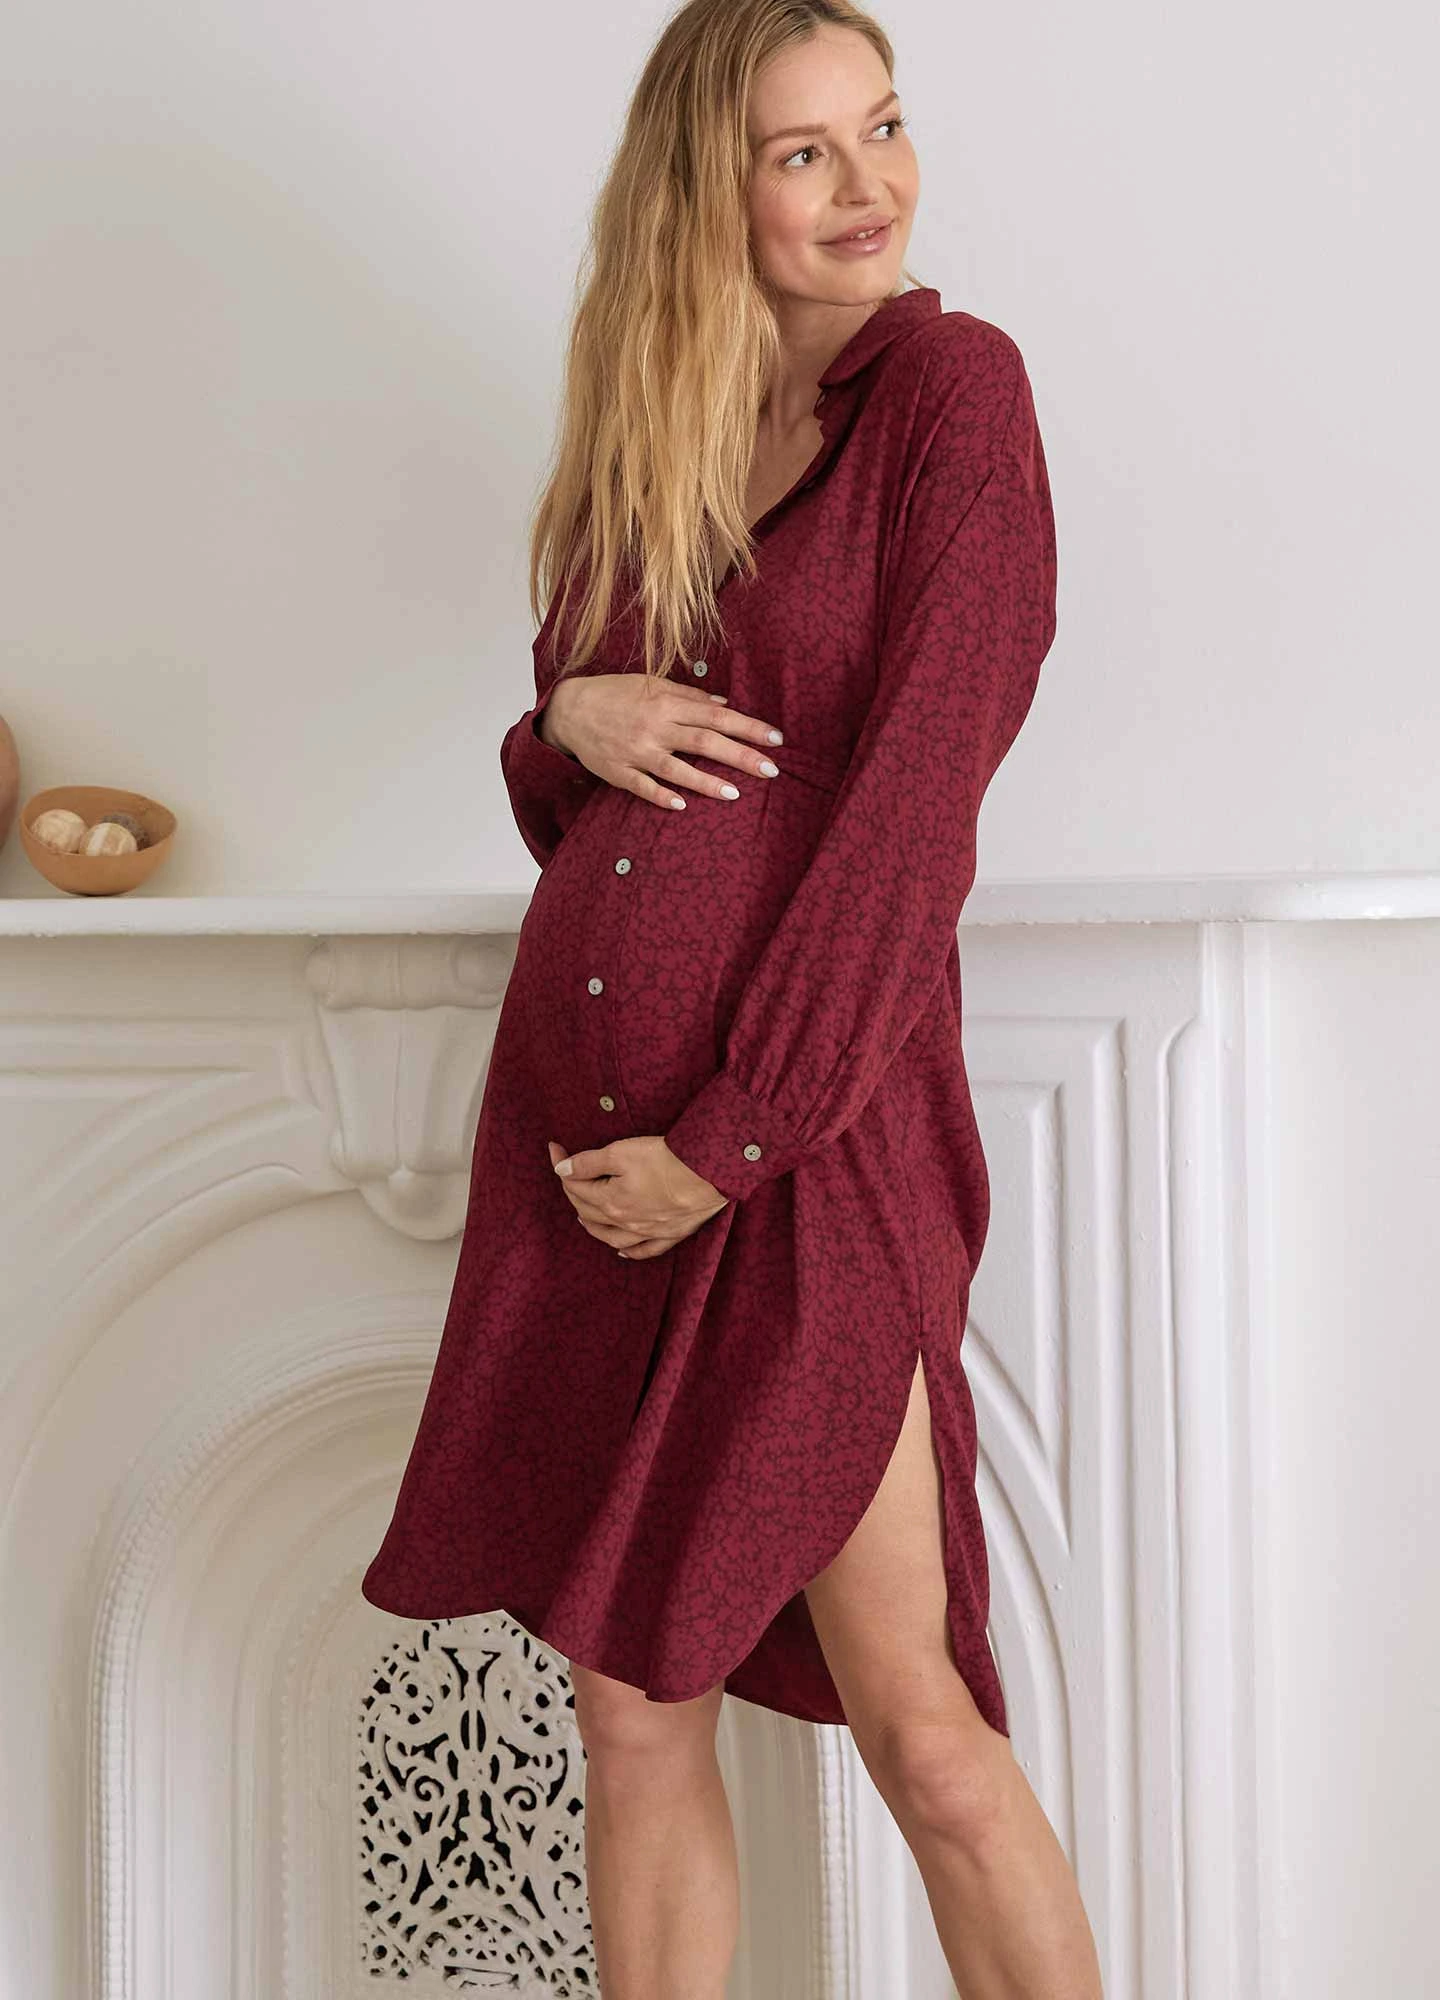 How to Build a Capsule Maternity Wardrobe - Putting Me Together